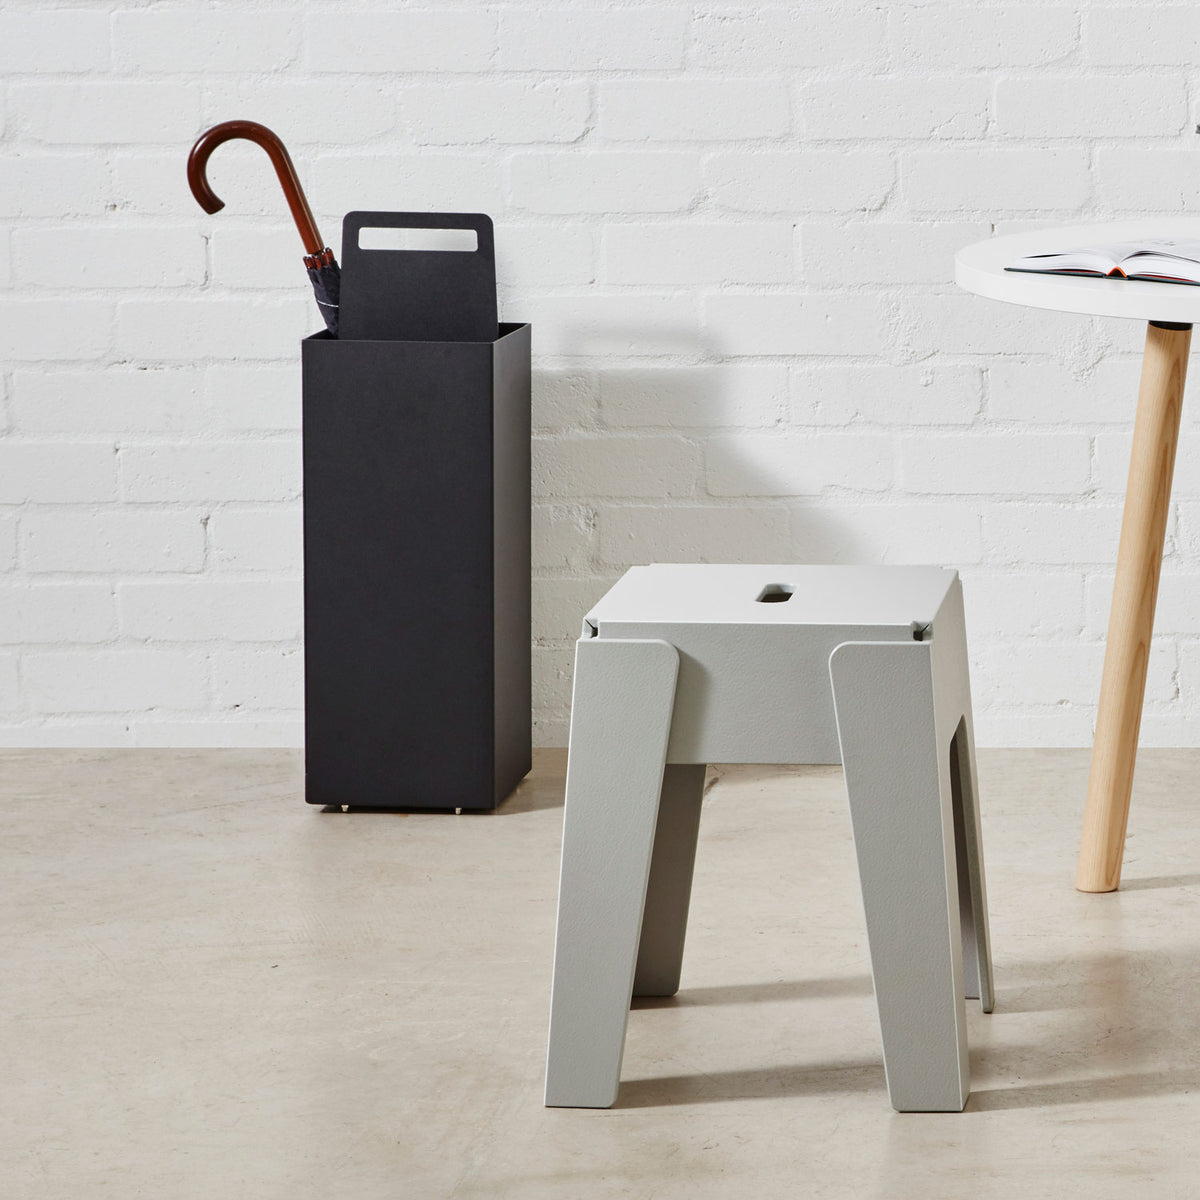 Alfred Umbrella Stand and Butter Stool | DesignByThem | Gallery